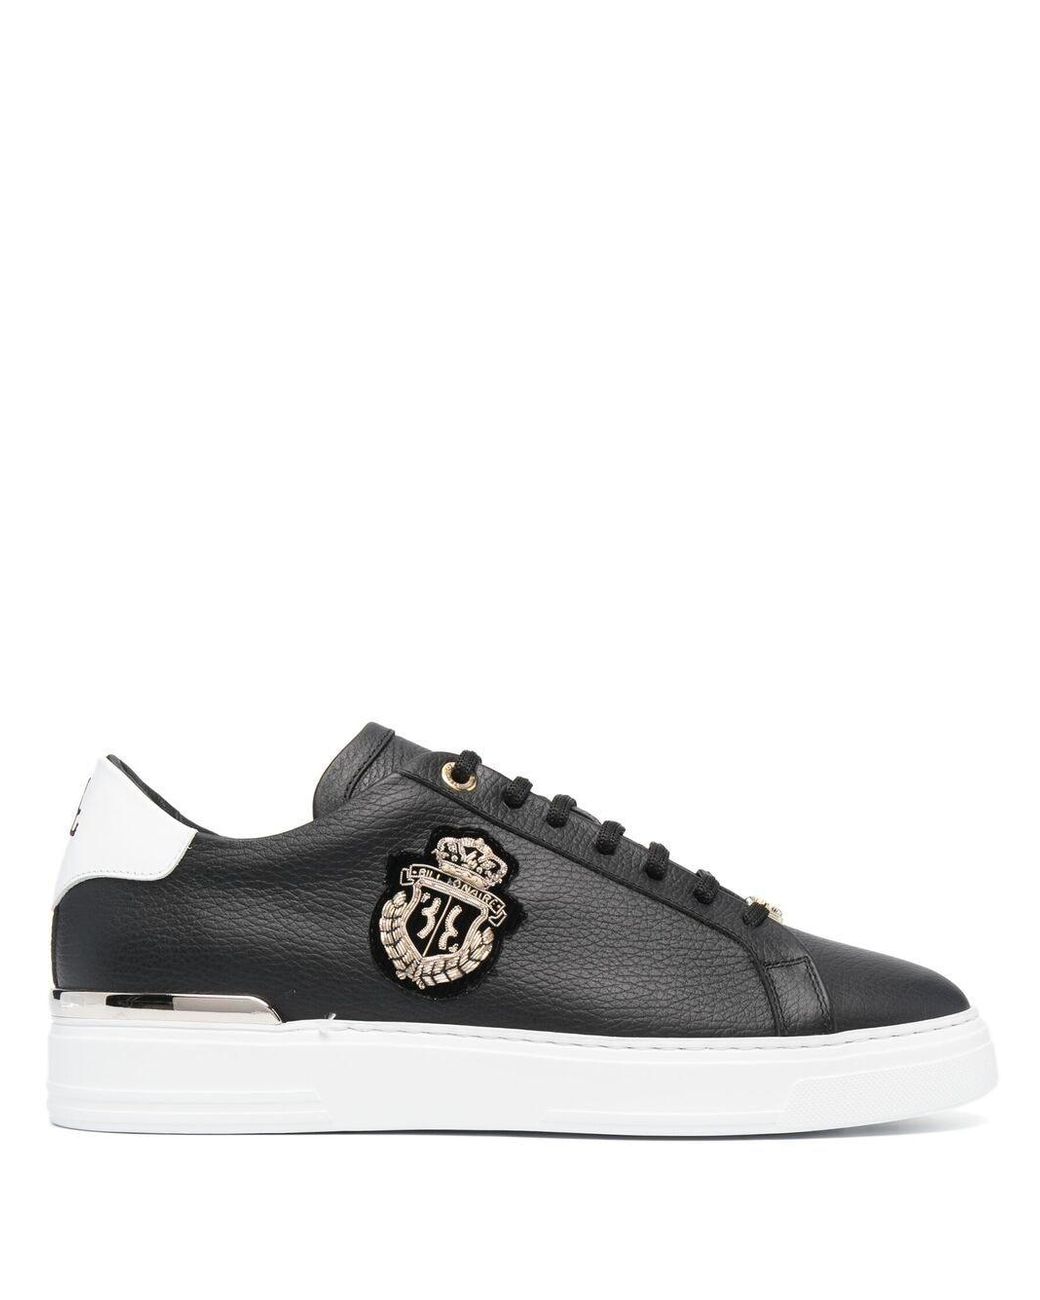 Billionaire Leather Low-top Sneakers in Black for Men - Lyst